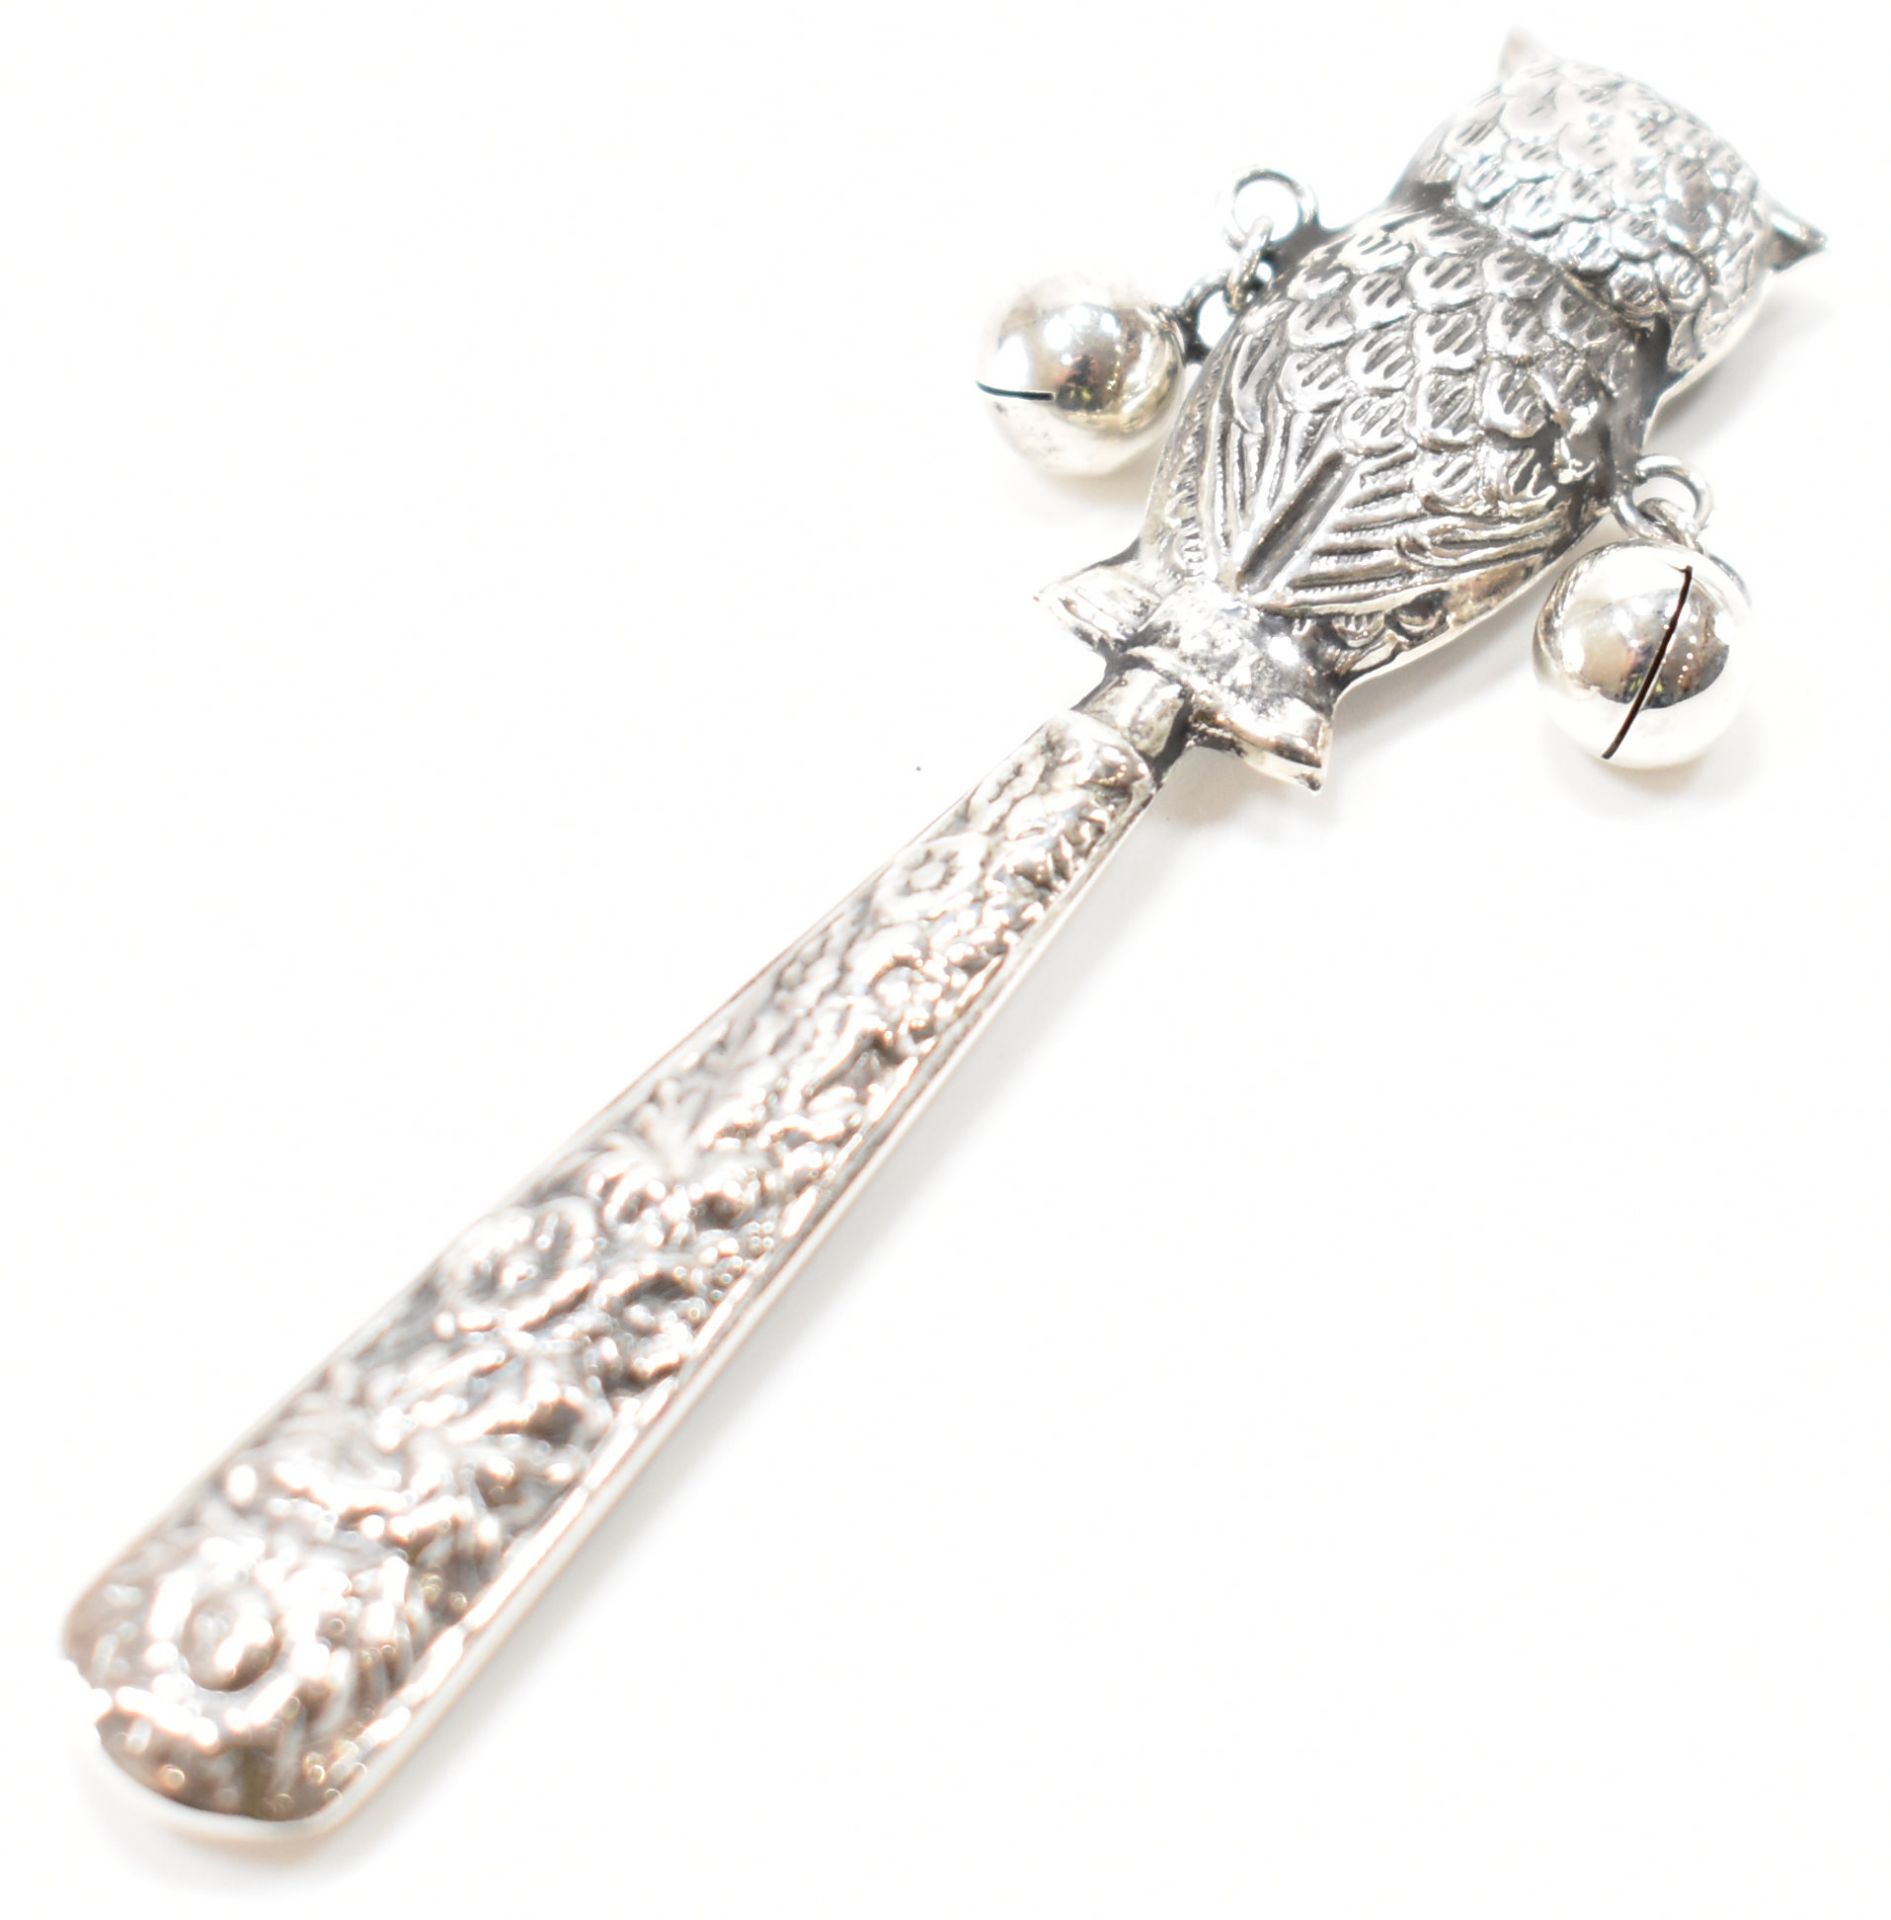 SILVER OWL BABY RATTLE - Image 4 of 4